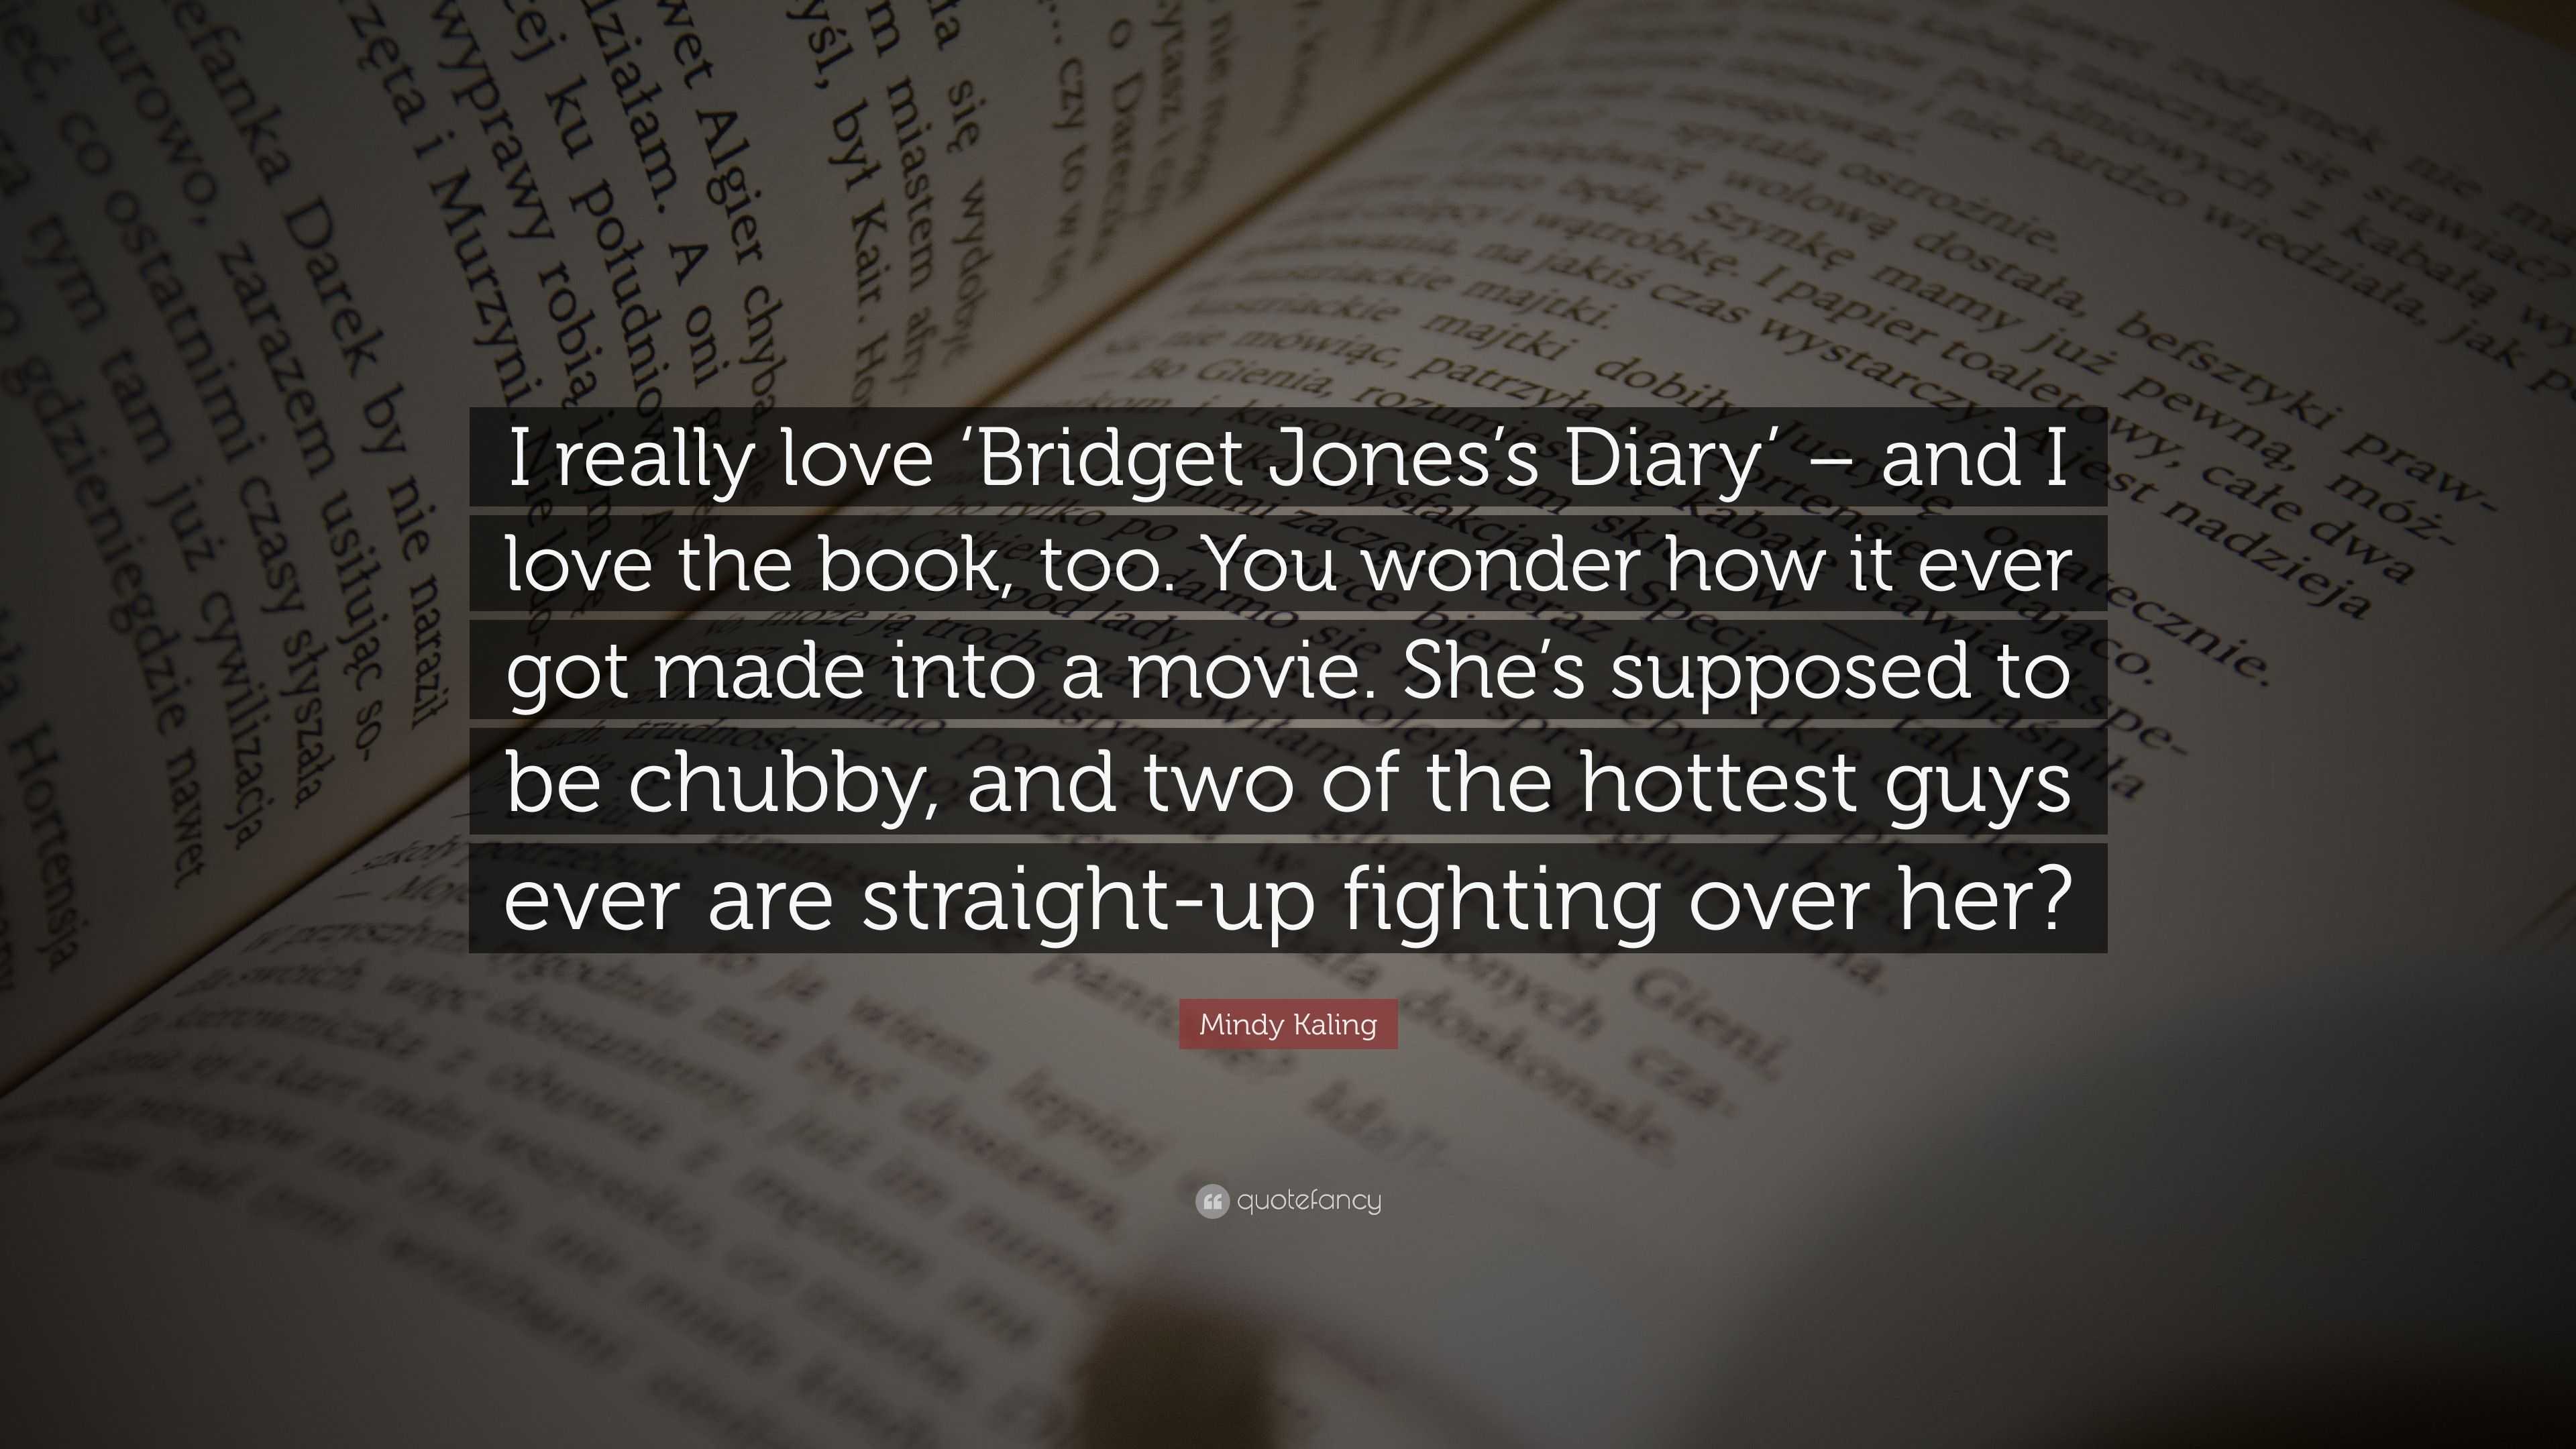 Mindy Kaling Quote: “I Really Love 'Bridget Jones's Diary' – And I Love The Book, Too. You Wonder How It Ever Got Made Into A Movie. She's Su...”